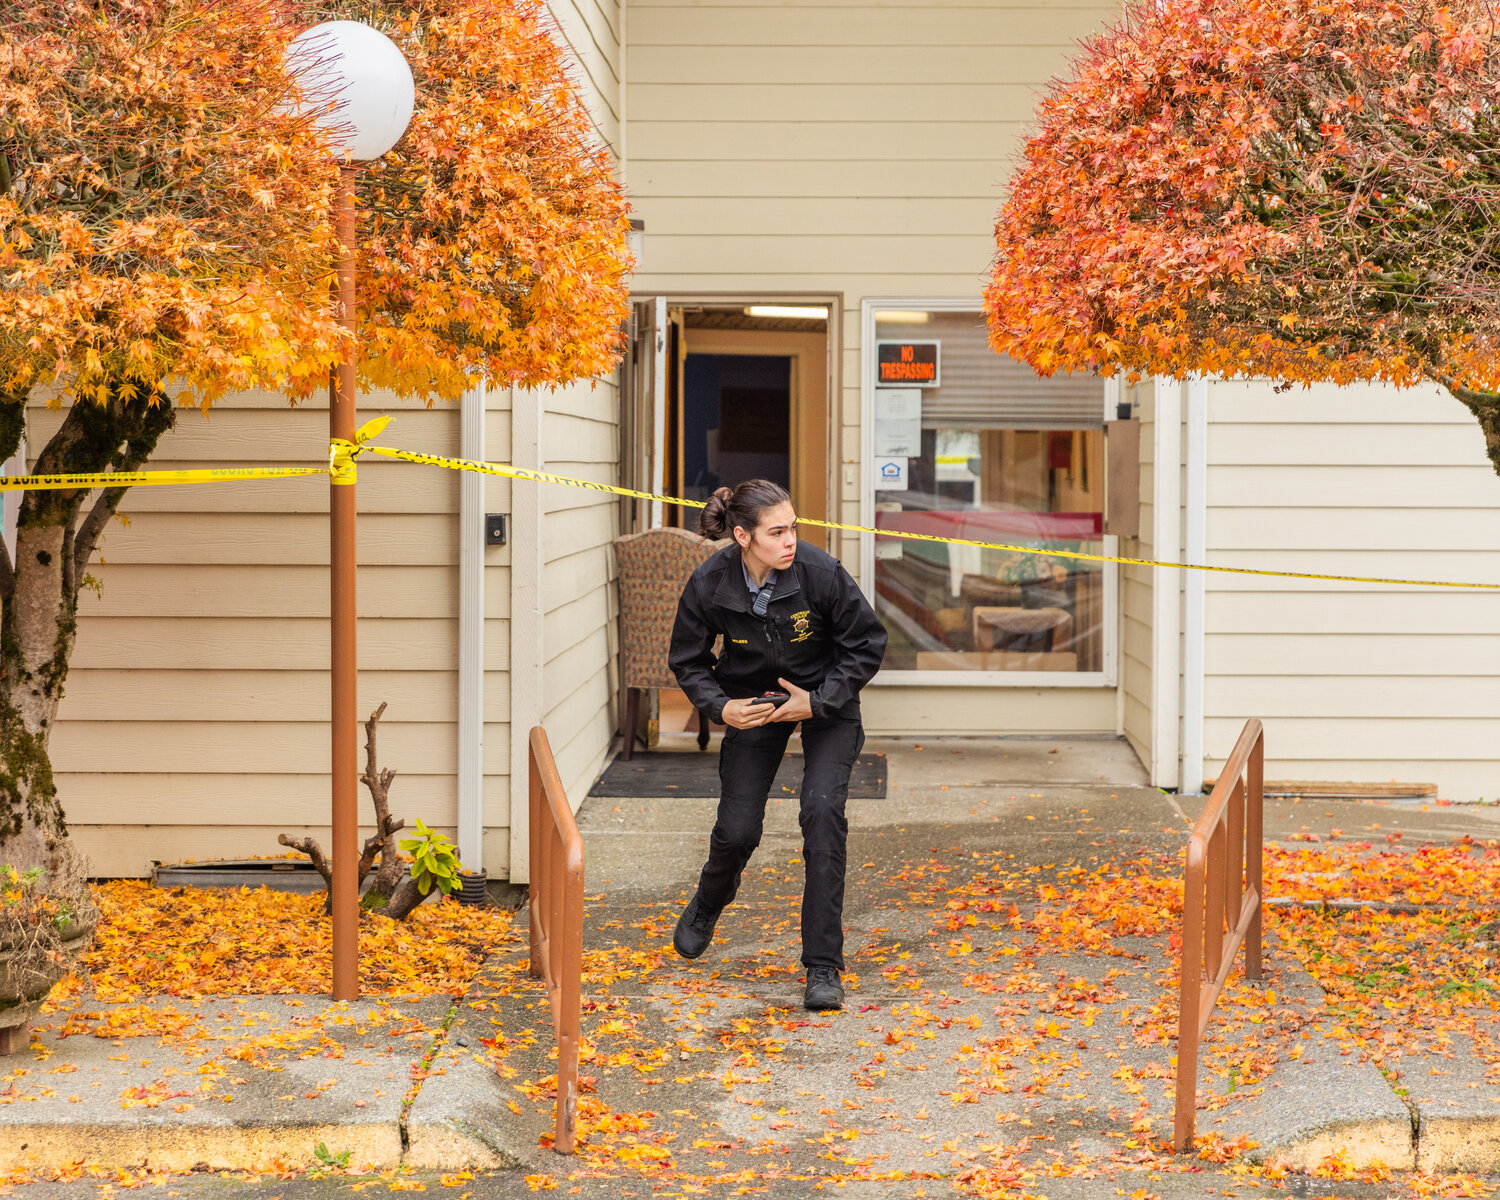 Centralia police respond following a fire at the Centralia Manor Apartments on Wednesday, Nov. 29.